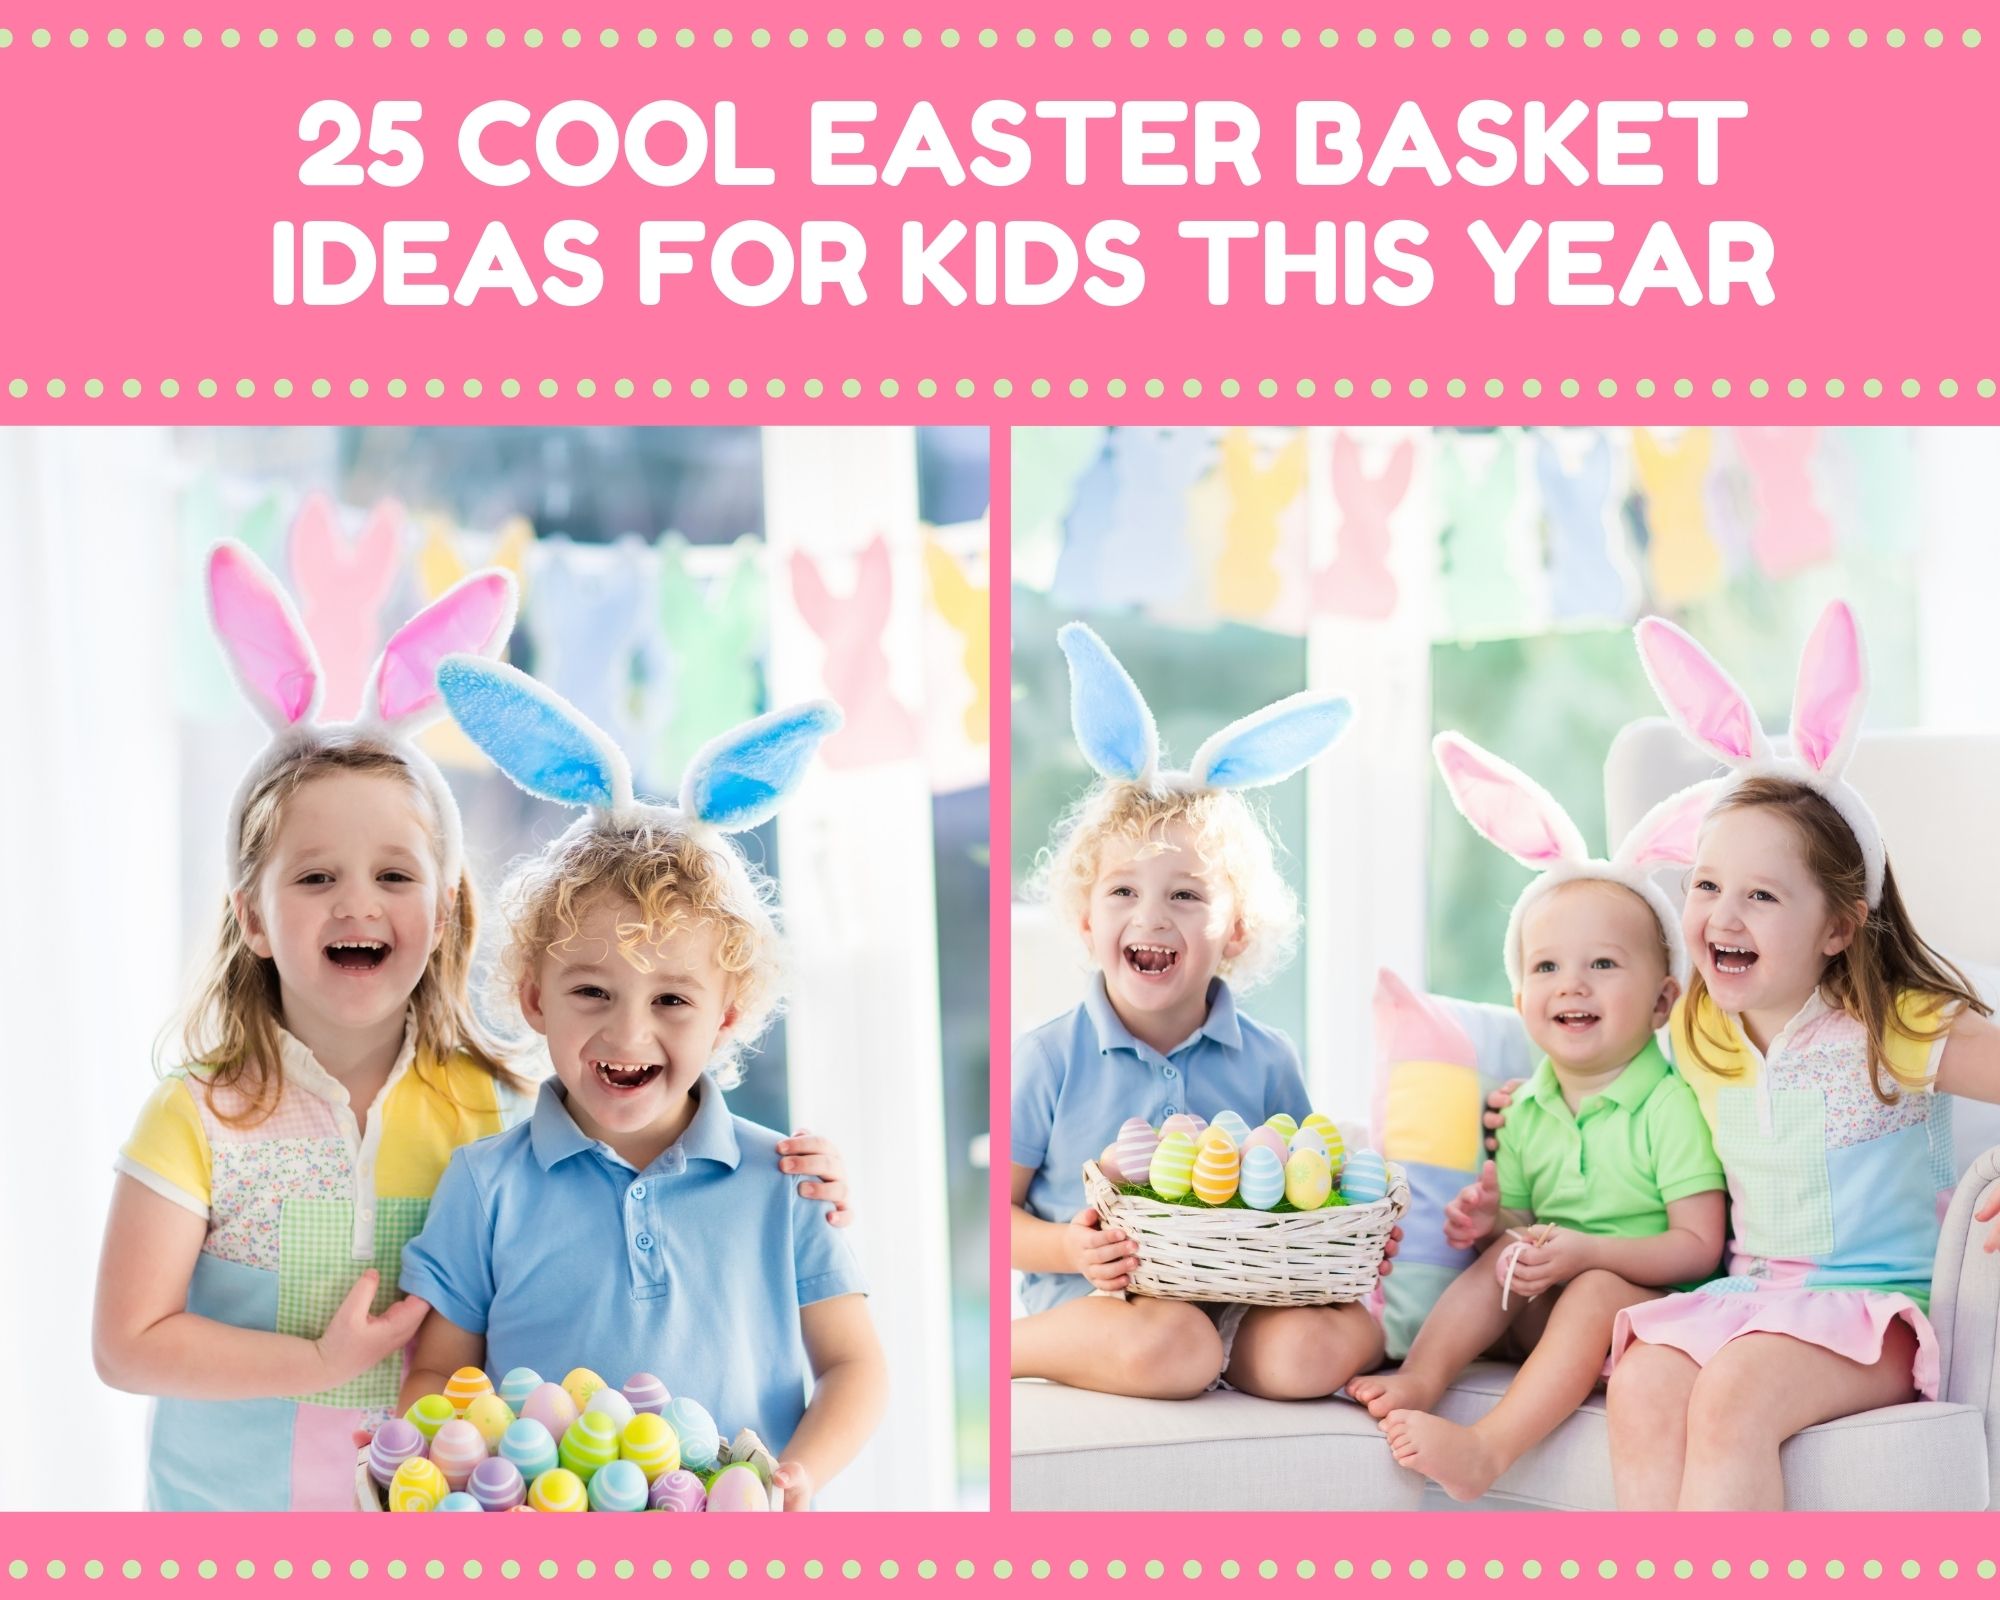 25 Cool Easter Basket Ideas for Kids This Year